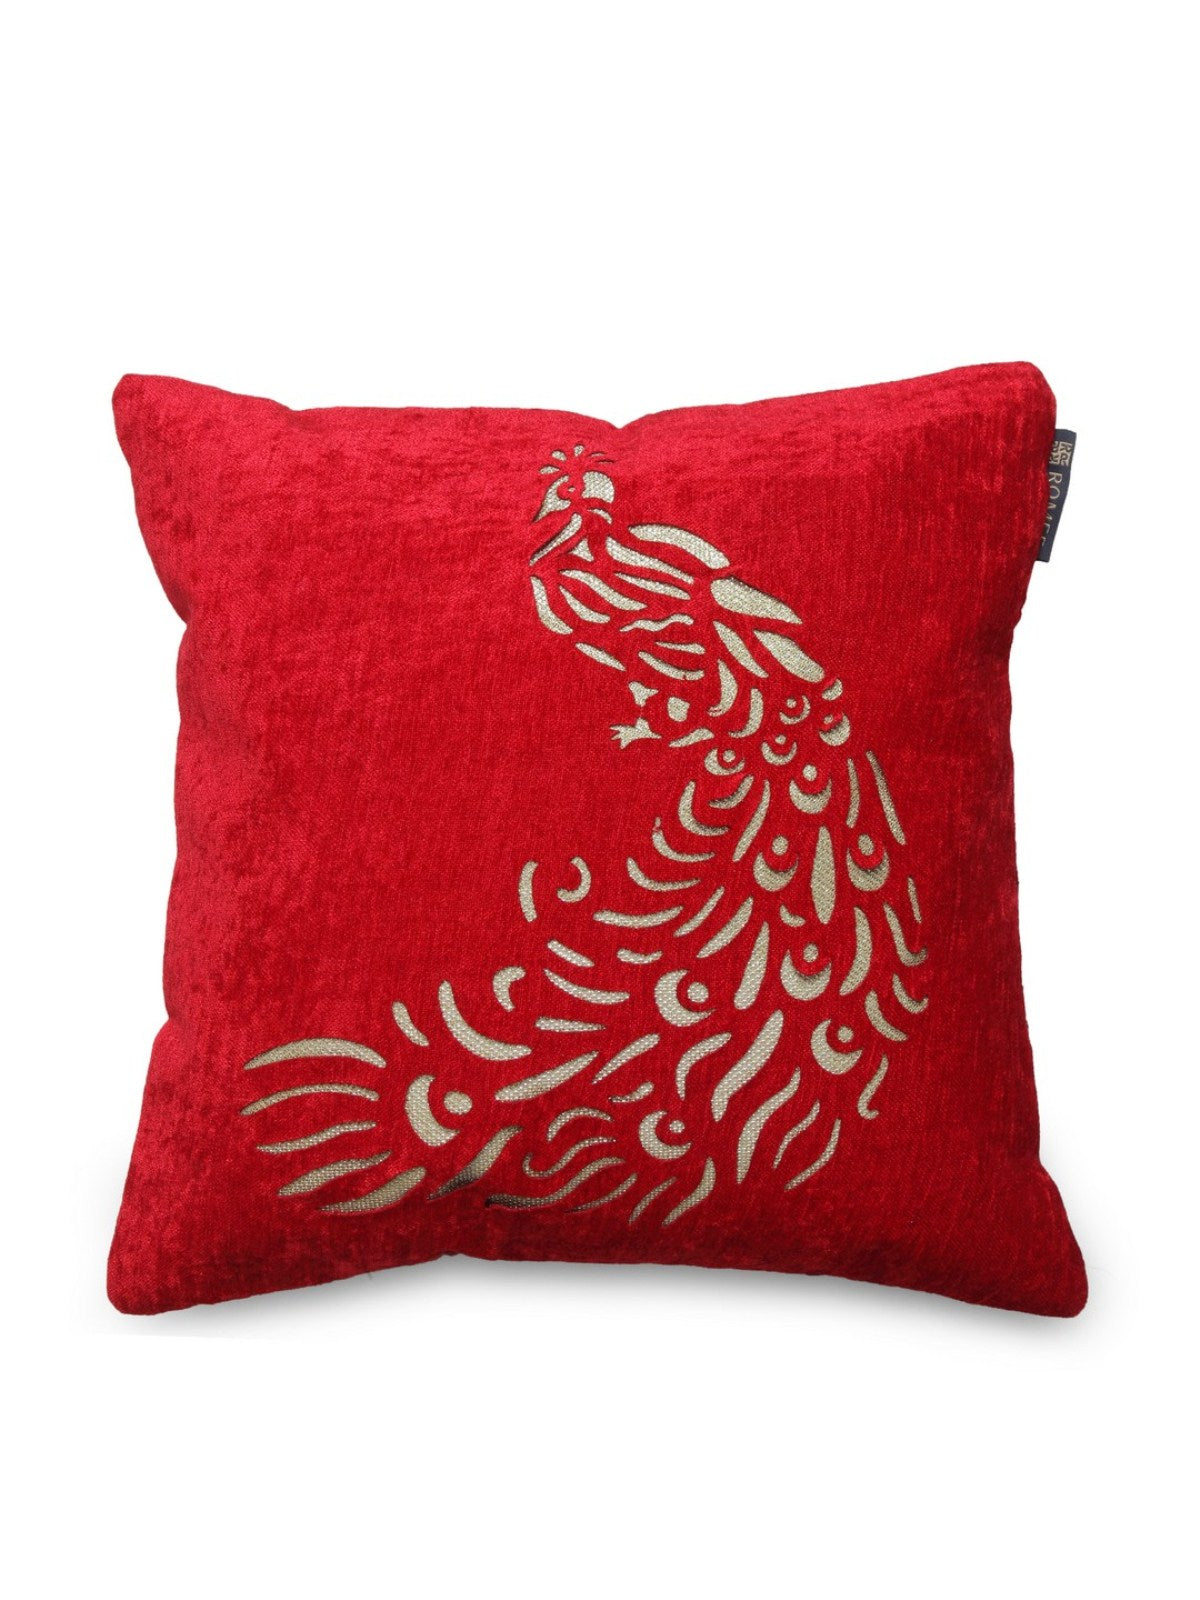 Red Set of 5 Velvet 16 Inch x 16 Inch Cushion Covers